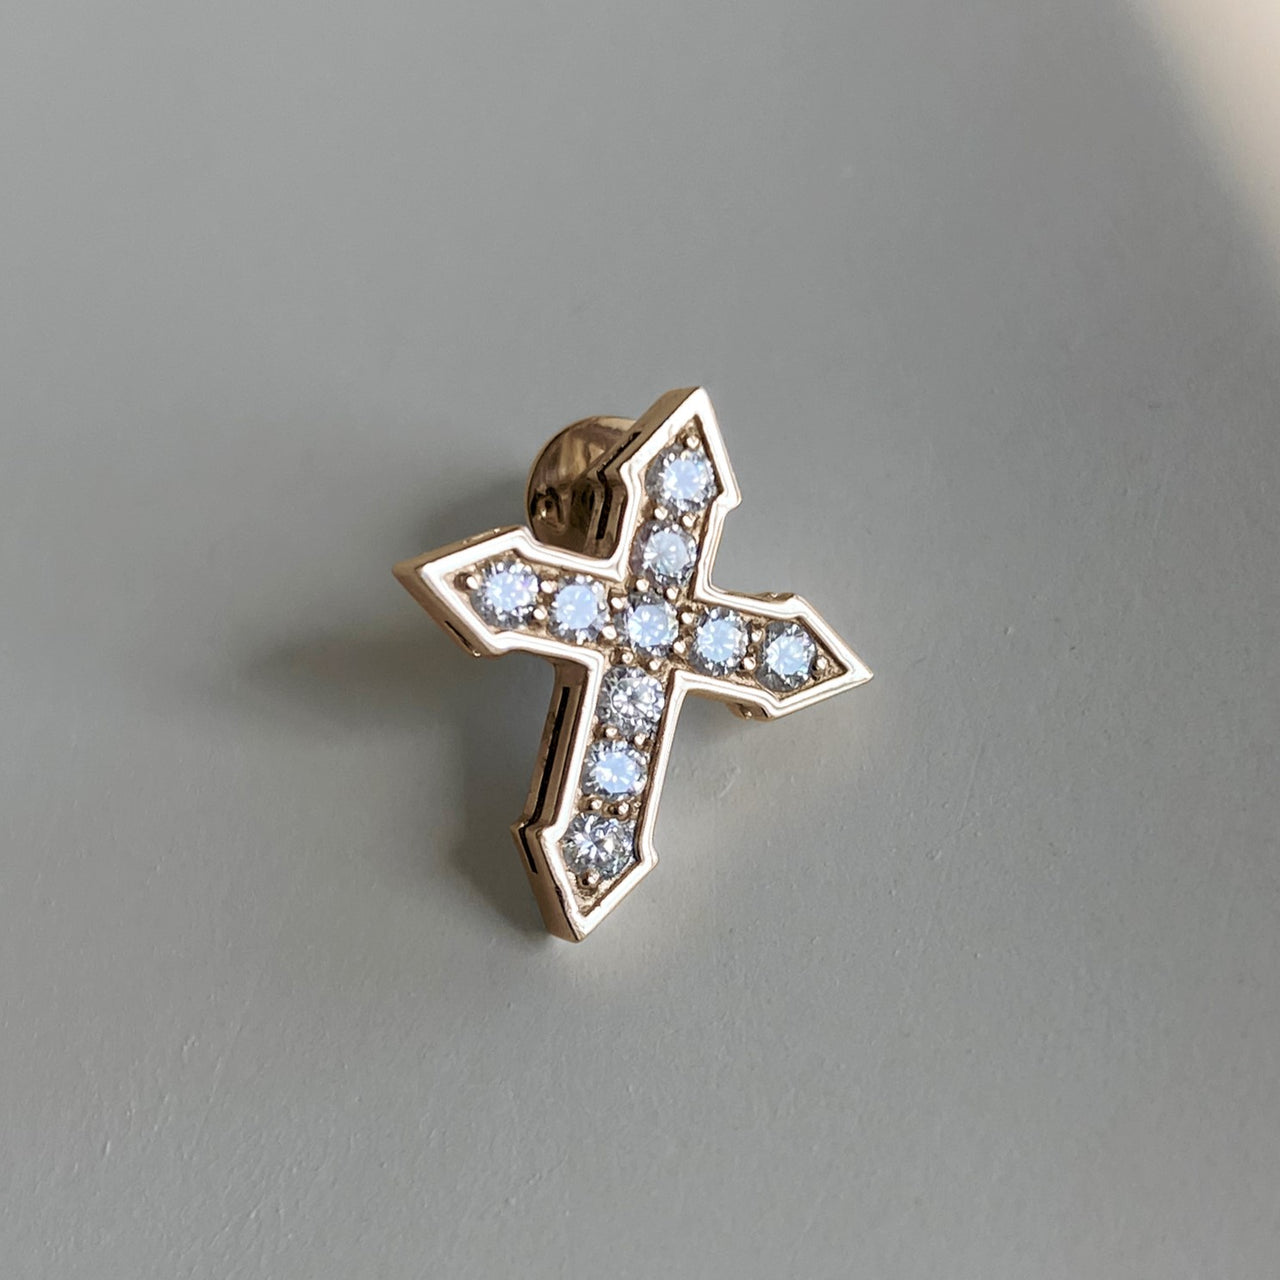 STUD CROSS "GLOW" WITH WHITE DIAMONDS / SOLID GOLD